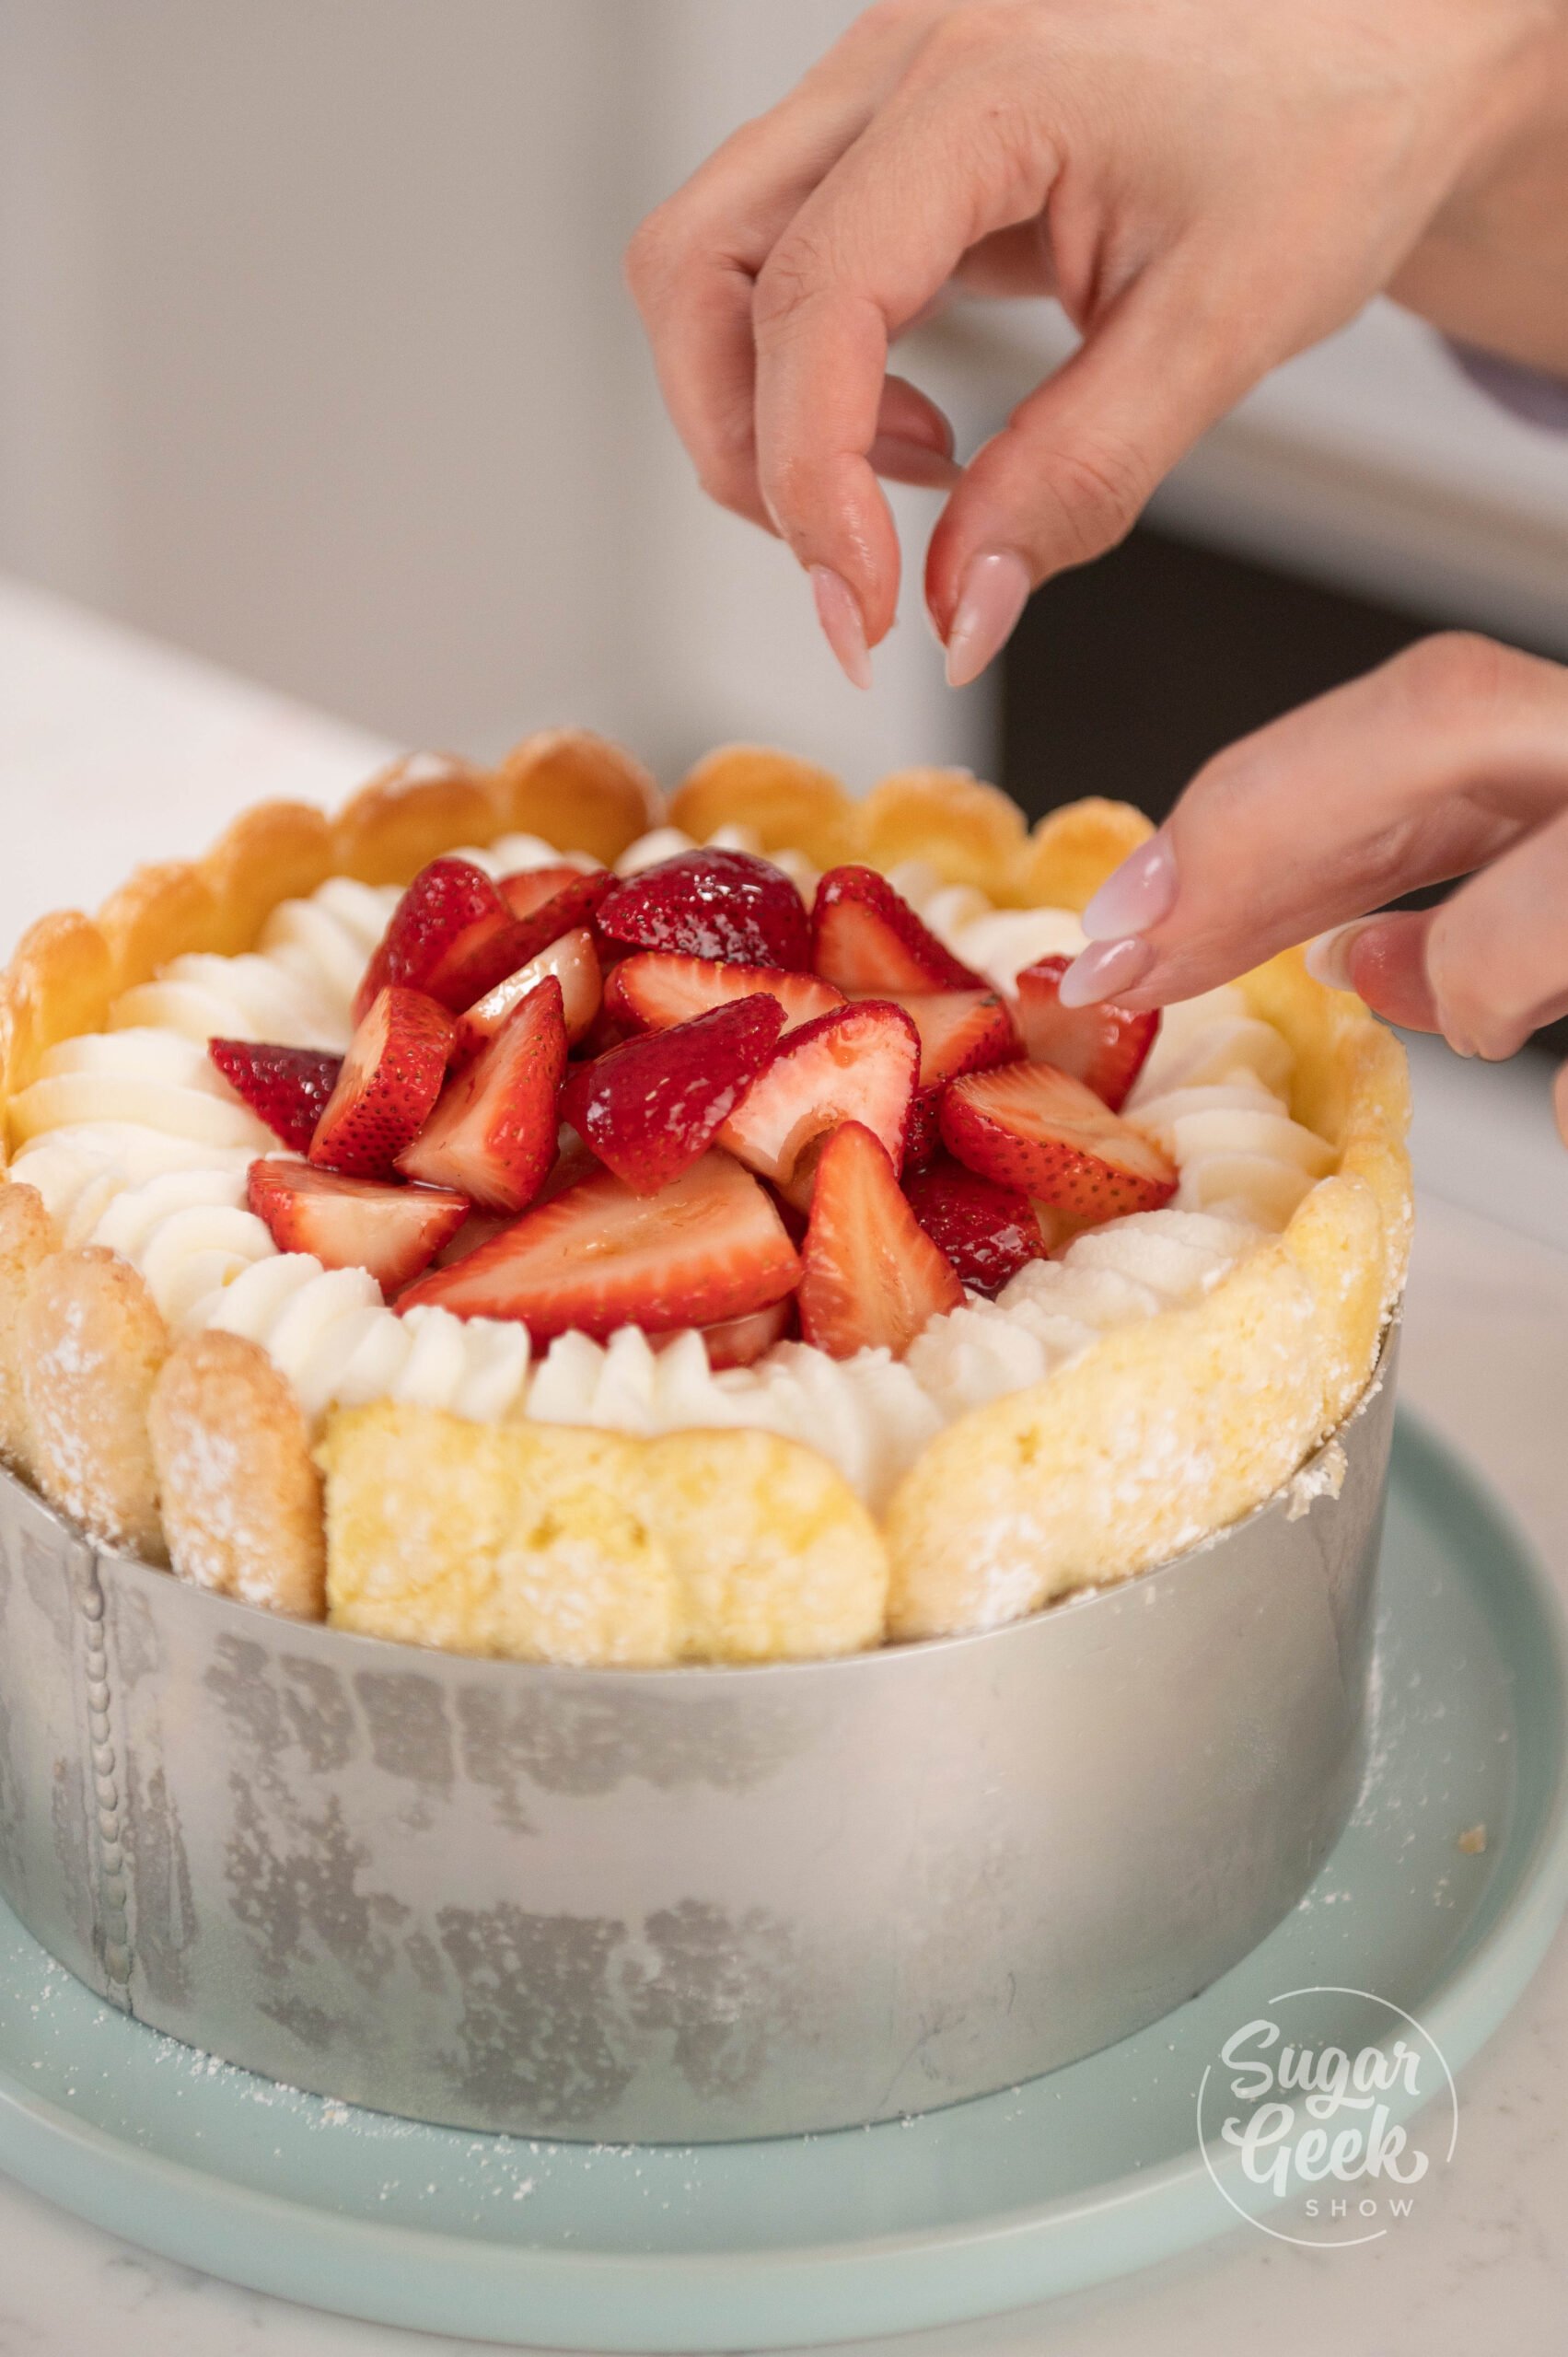 hand placing strawberries on top of cake